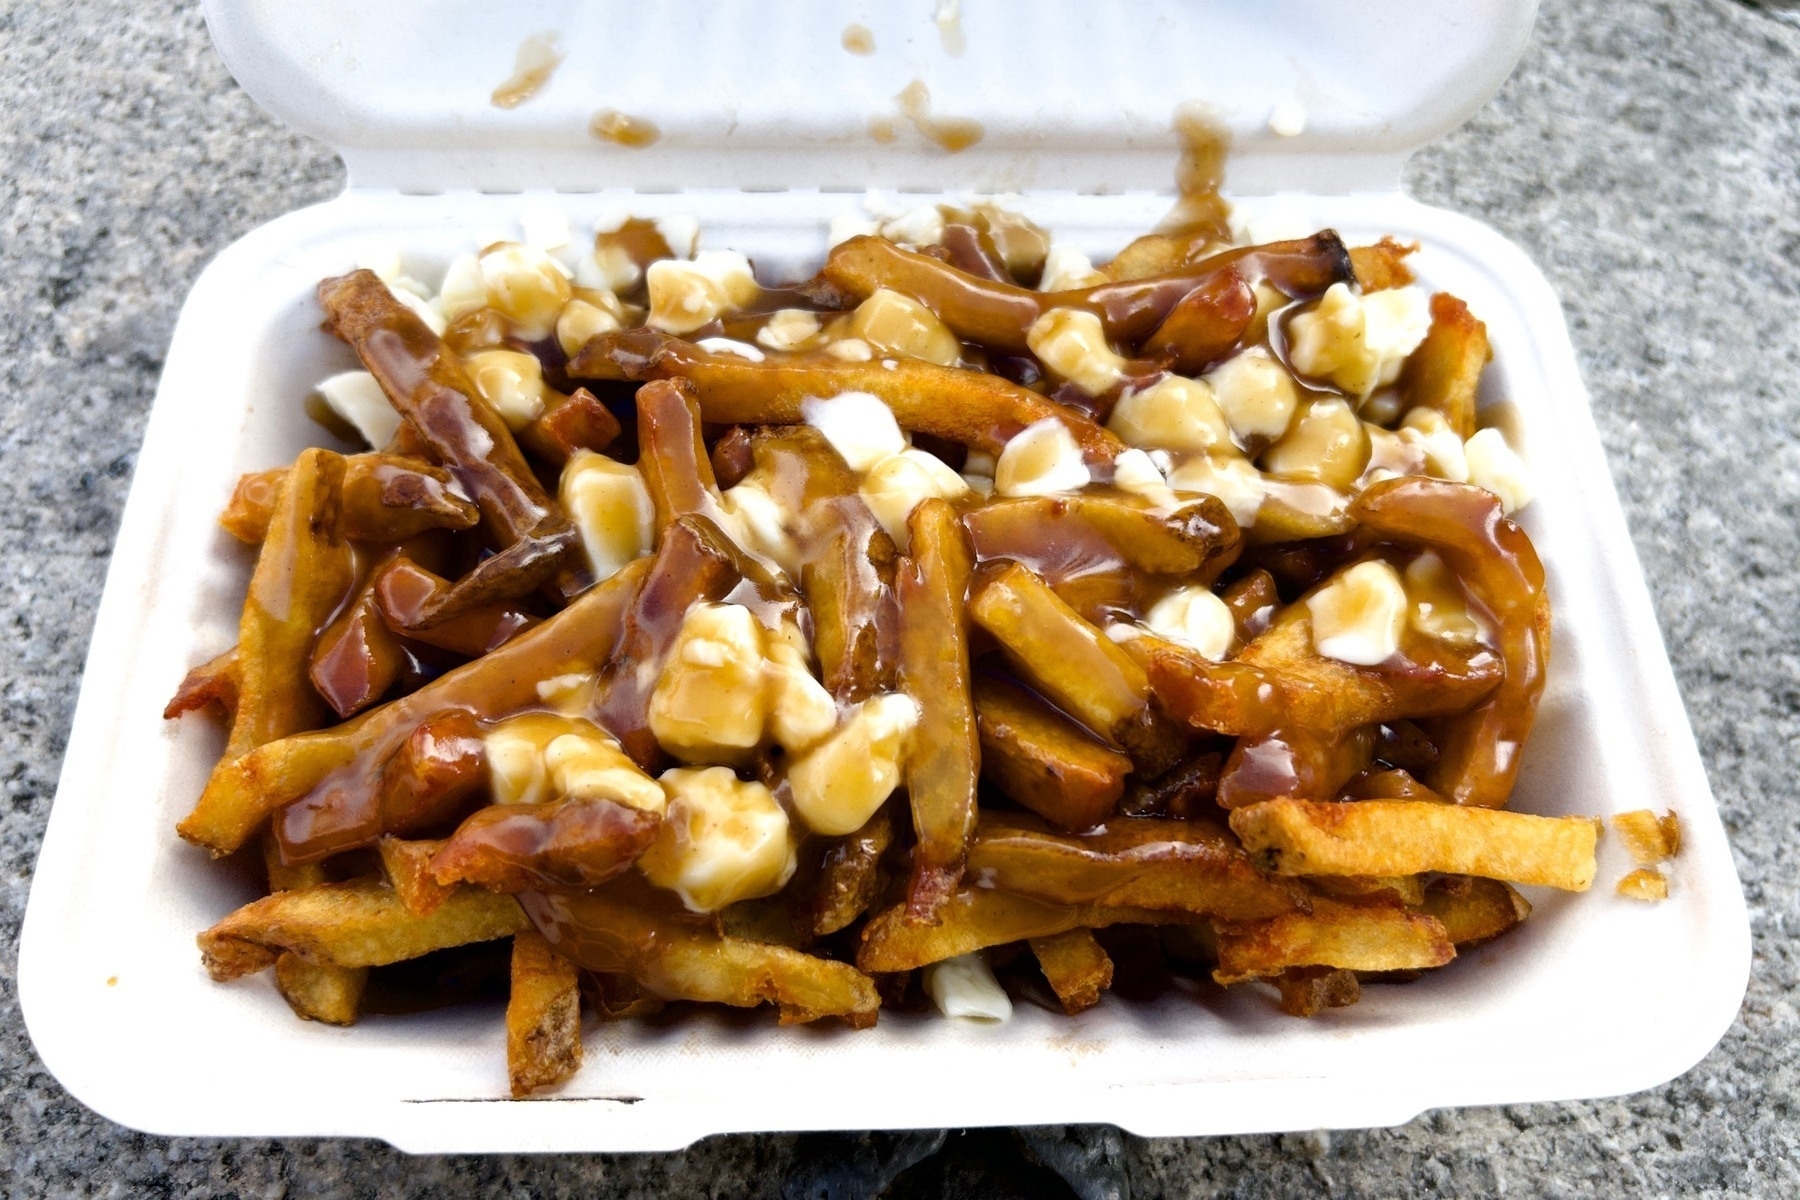 A rectangular cardboard takeout carton filled with fries covered with cheese curds and gravy. 